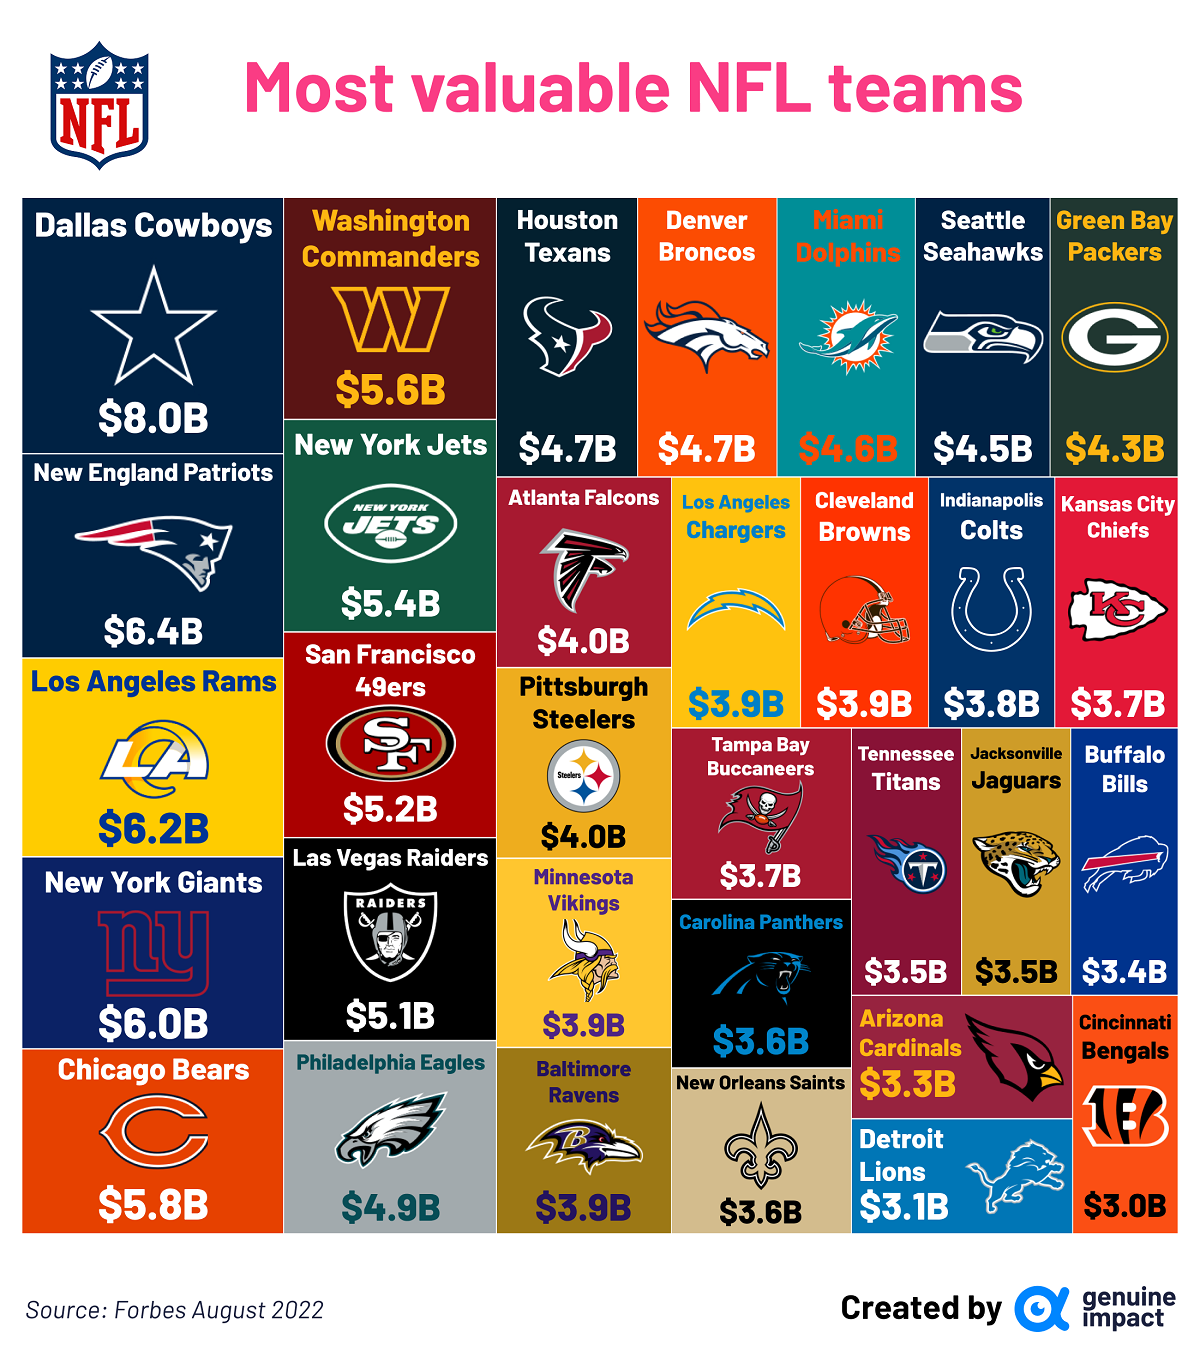 Ranked The Most Valuable NFL Teams in 2022